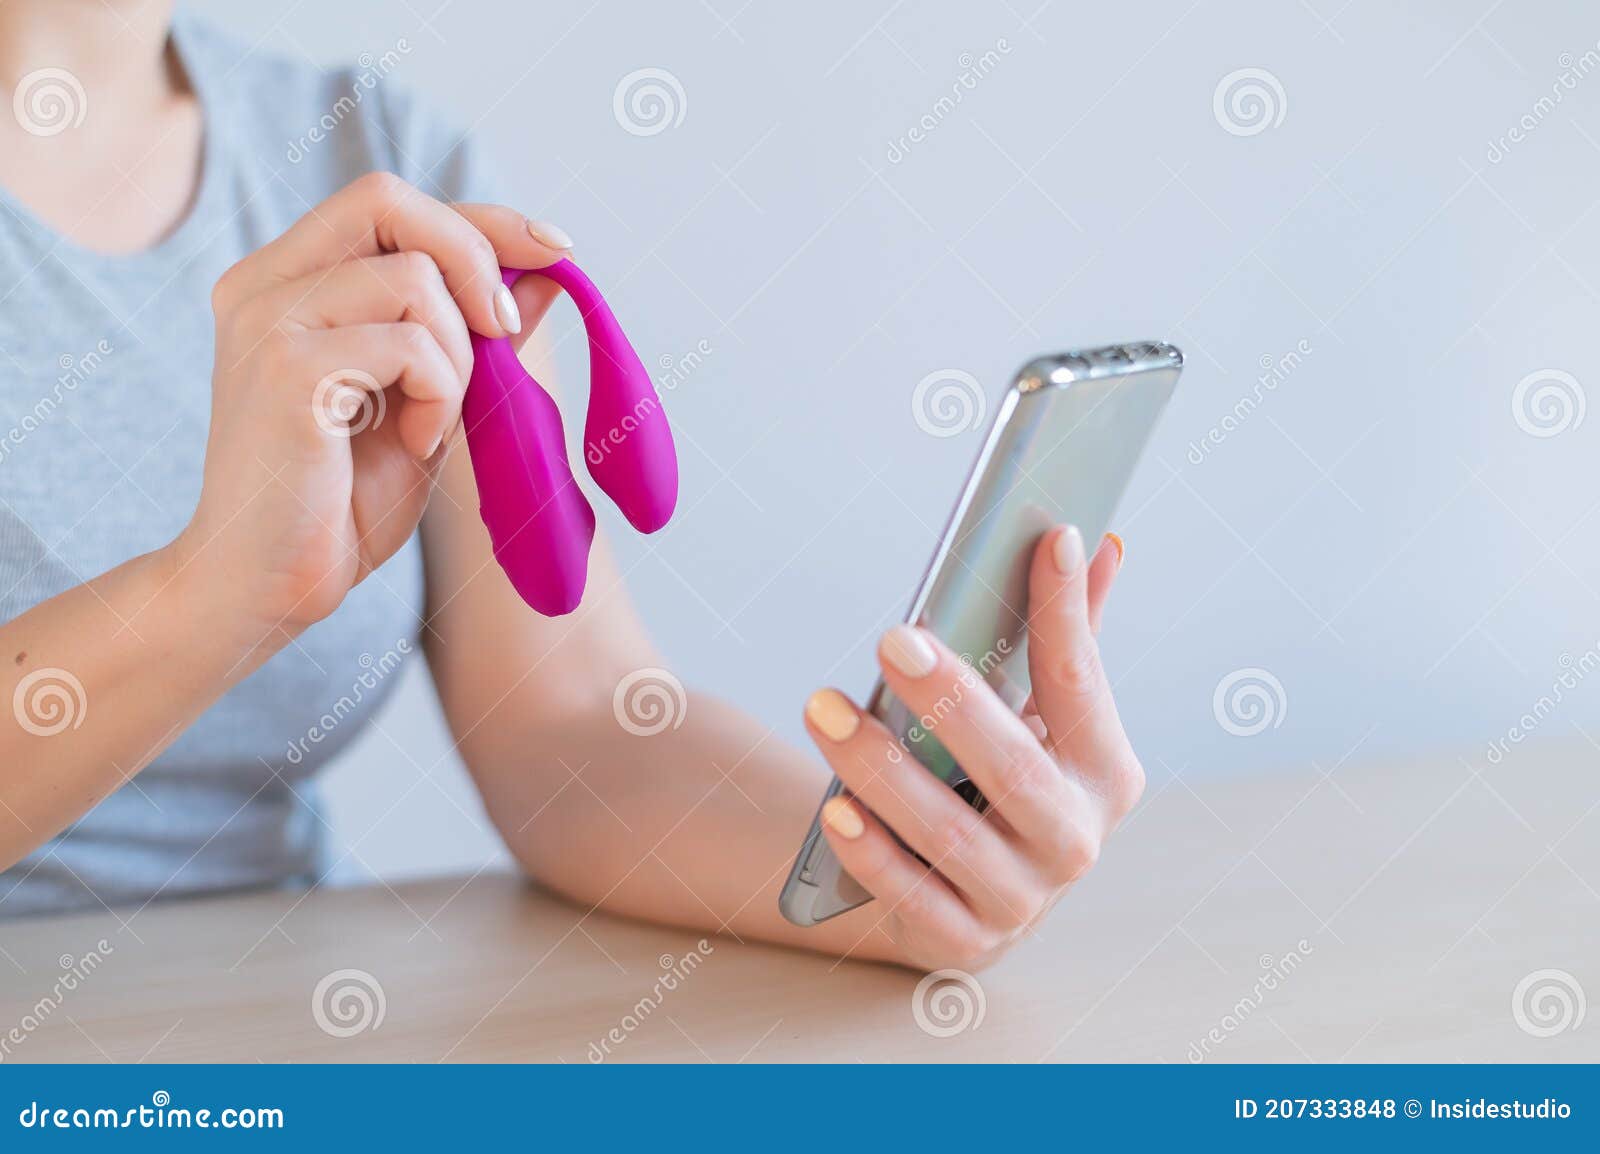 A Woman Demonstrates a Modern Curved Clitoral Vaginal Vibrator in Her Video Blog on Her Smartphone photo